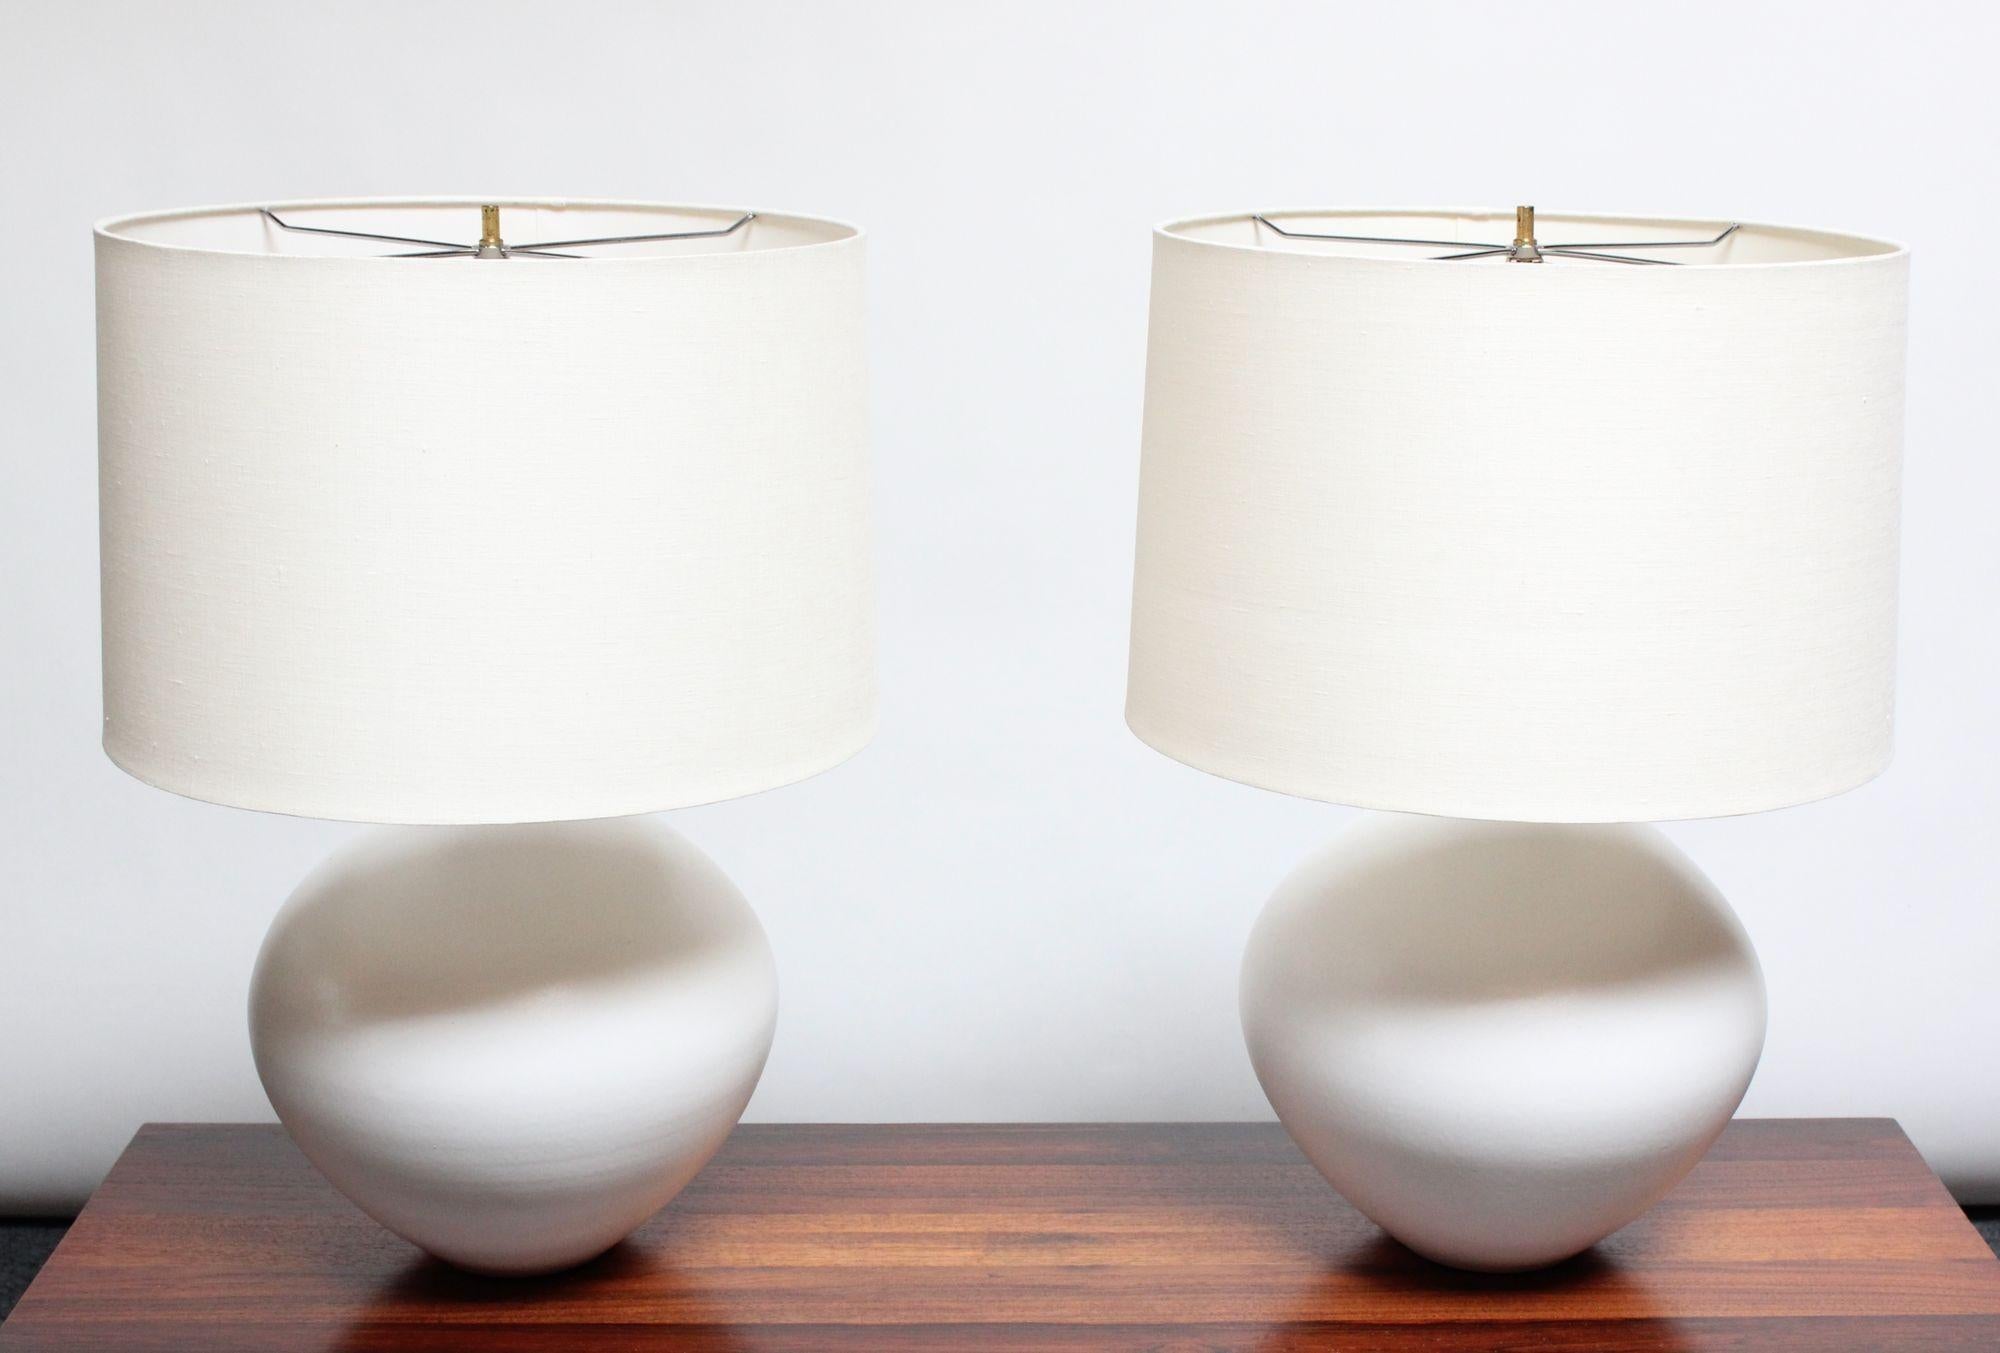 Large, bulbous-form ceramic table lamps in matte white glaze designed in the 1960s by Lee Rosen for Design Technics.
Shades are included but are neither original nor vintage.
Sculptural, modernist form with elegant brass stem and accents.
Incised